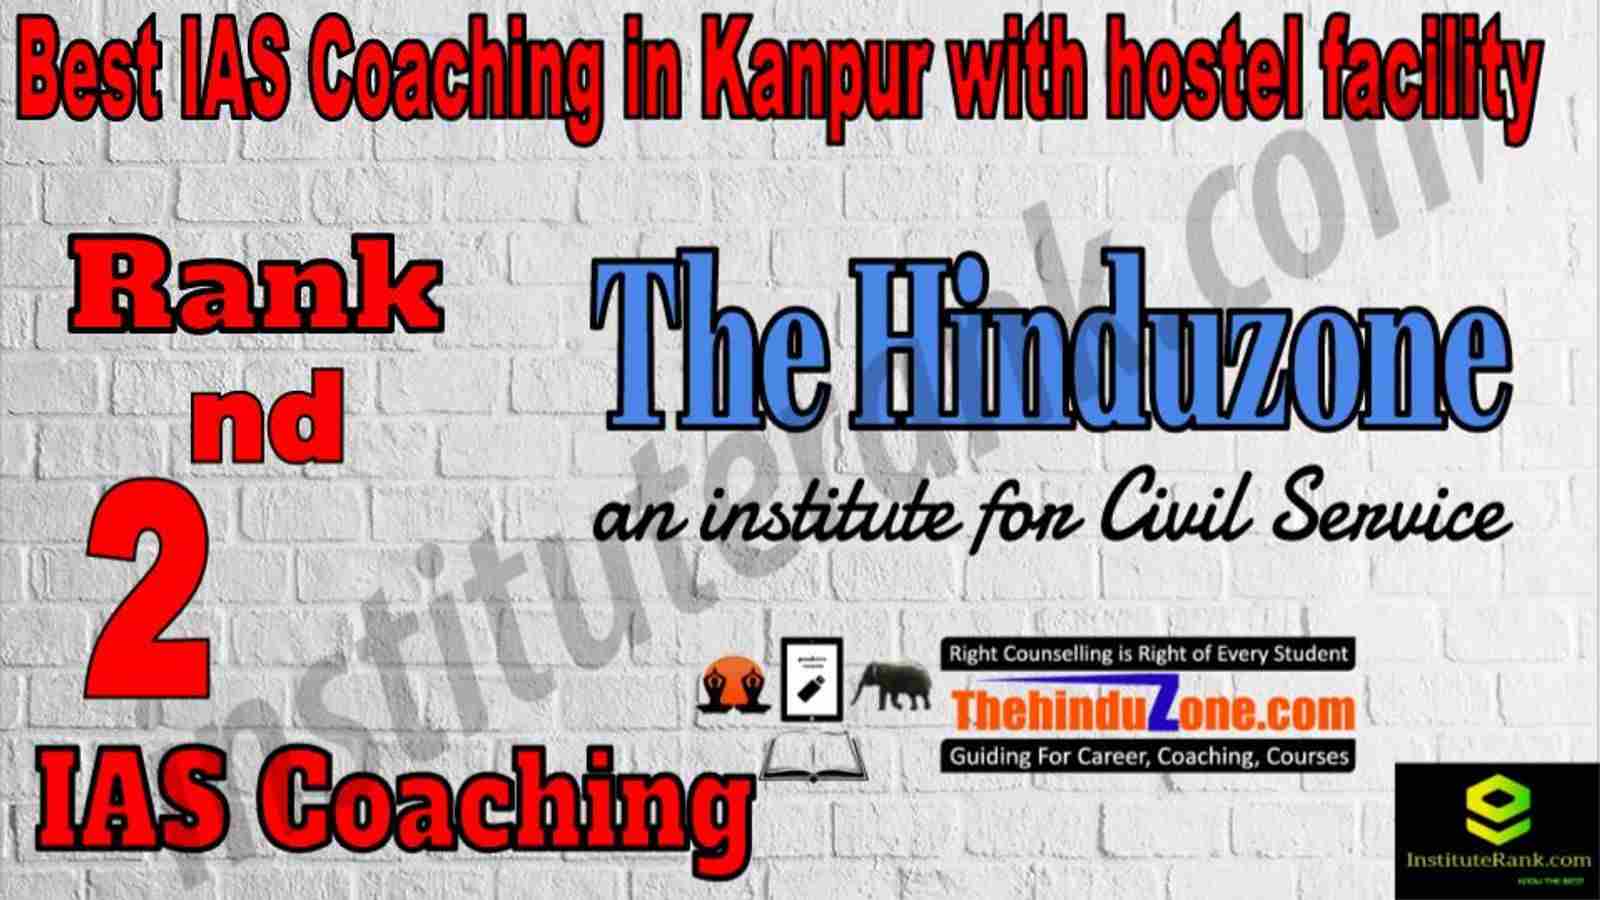 2nd Best IAS Coaching in Kanpur With hostel facility